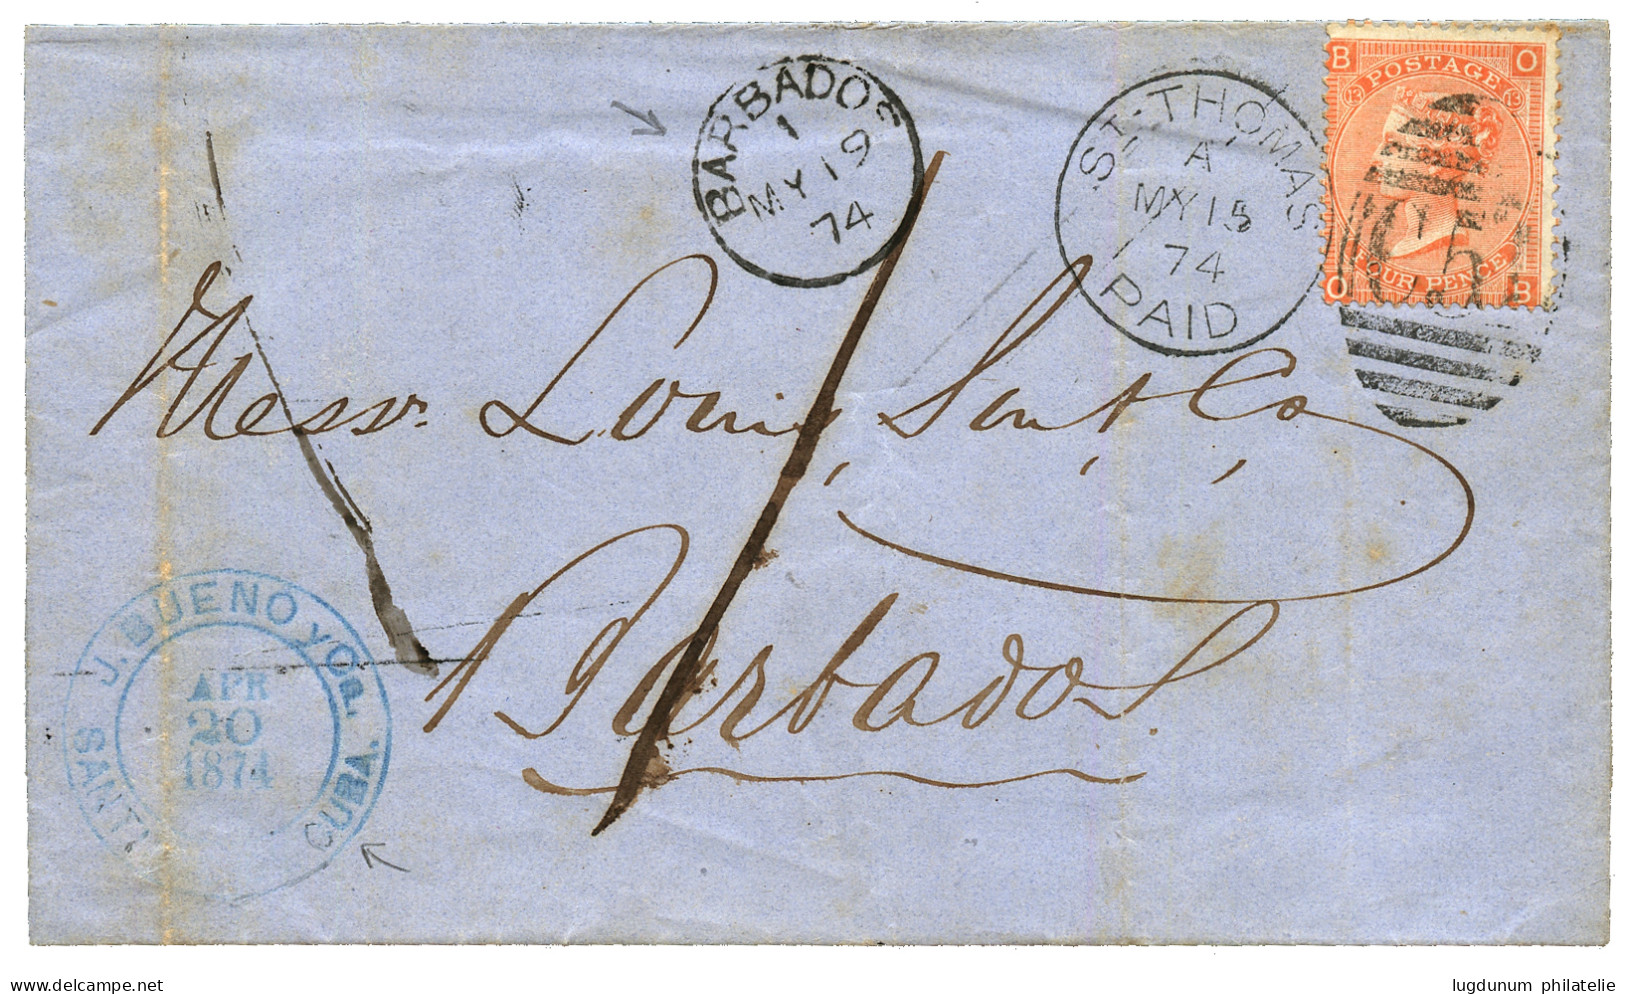 "CUBA Via DANISH WEST INDIES To BARBADOS" : 1874 4d Canc. C51 + ST THOMAS PAID + "1" Tax Marking + BARBADOS Cds On Cover - Danemark (Antilles)